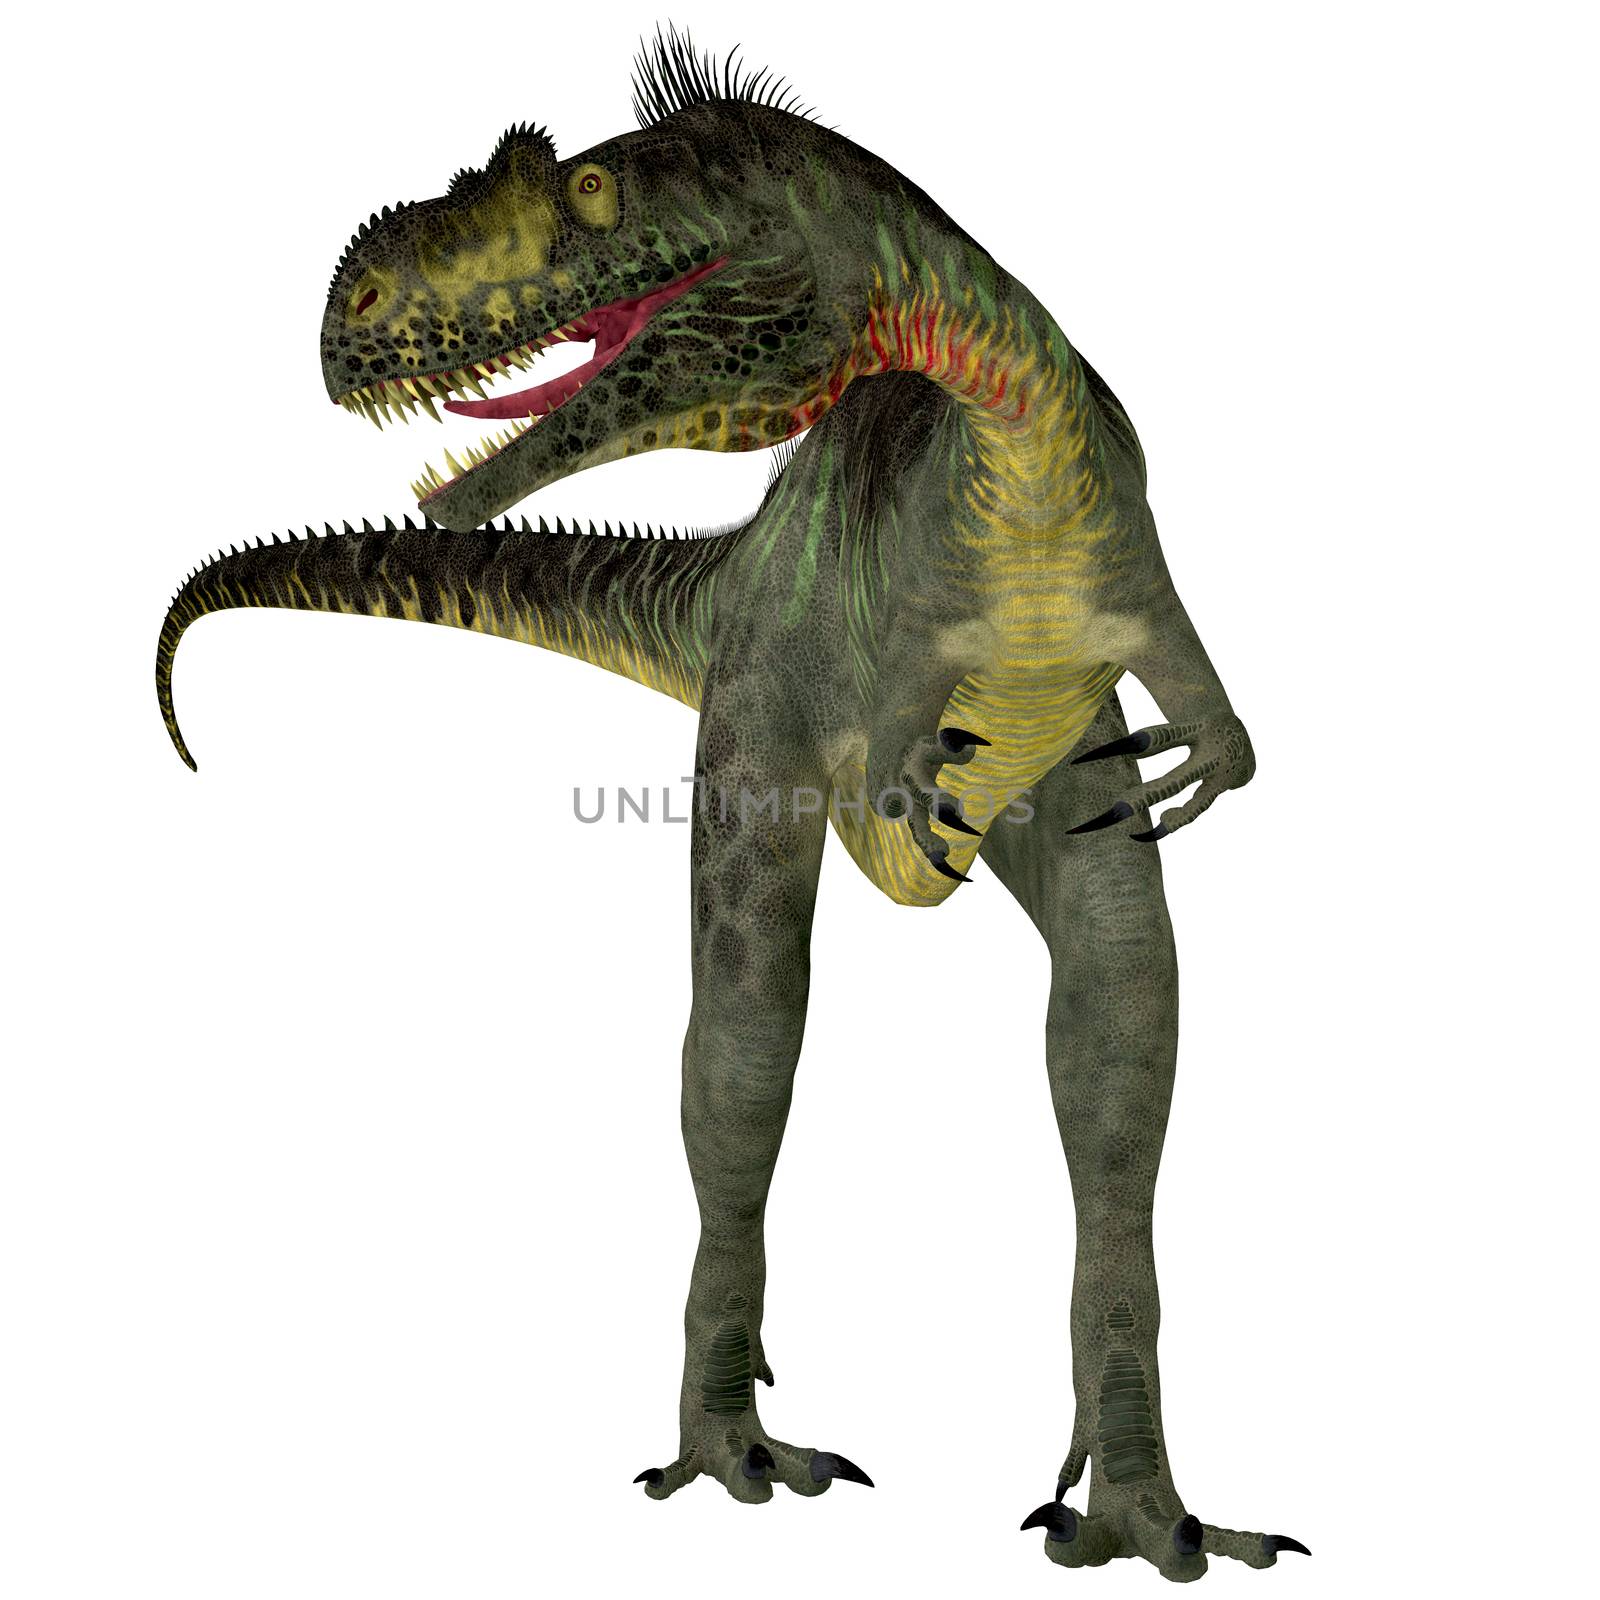 Megalosaurus was a large carnivorous theropod dinosaur that lived in the Jurassic Period of Europe.